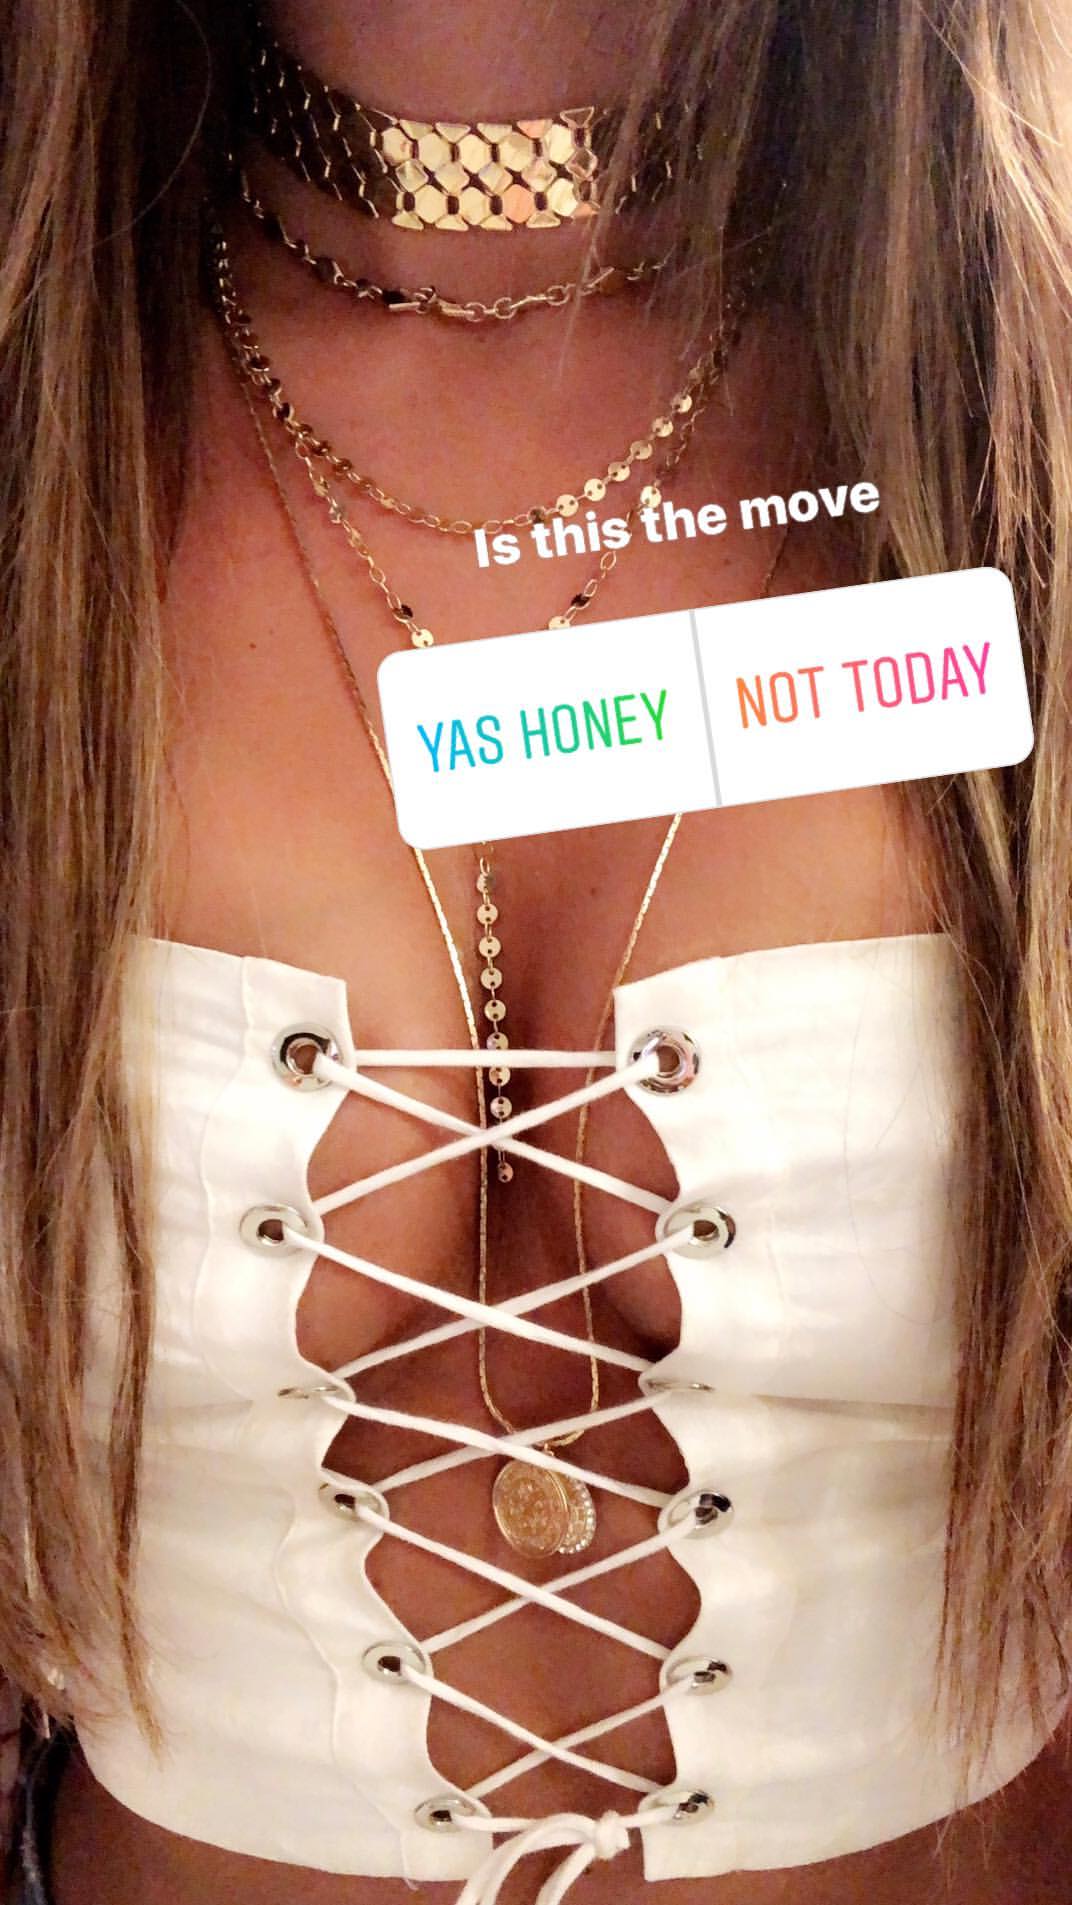 Erika Costell Sexy Pictures (47 Pics)